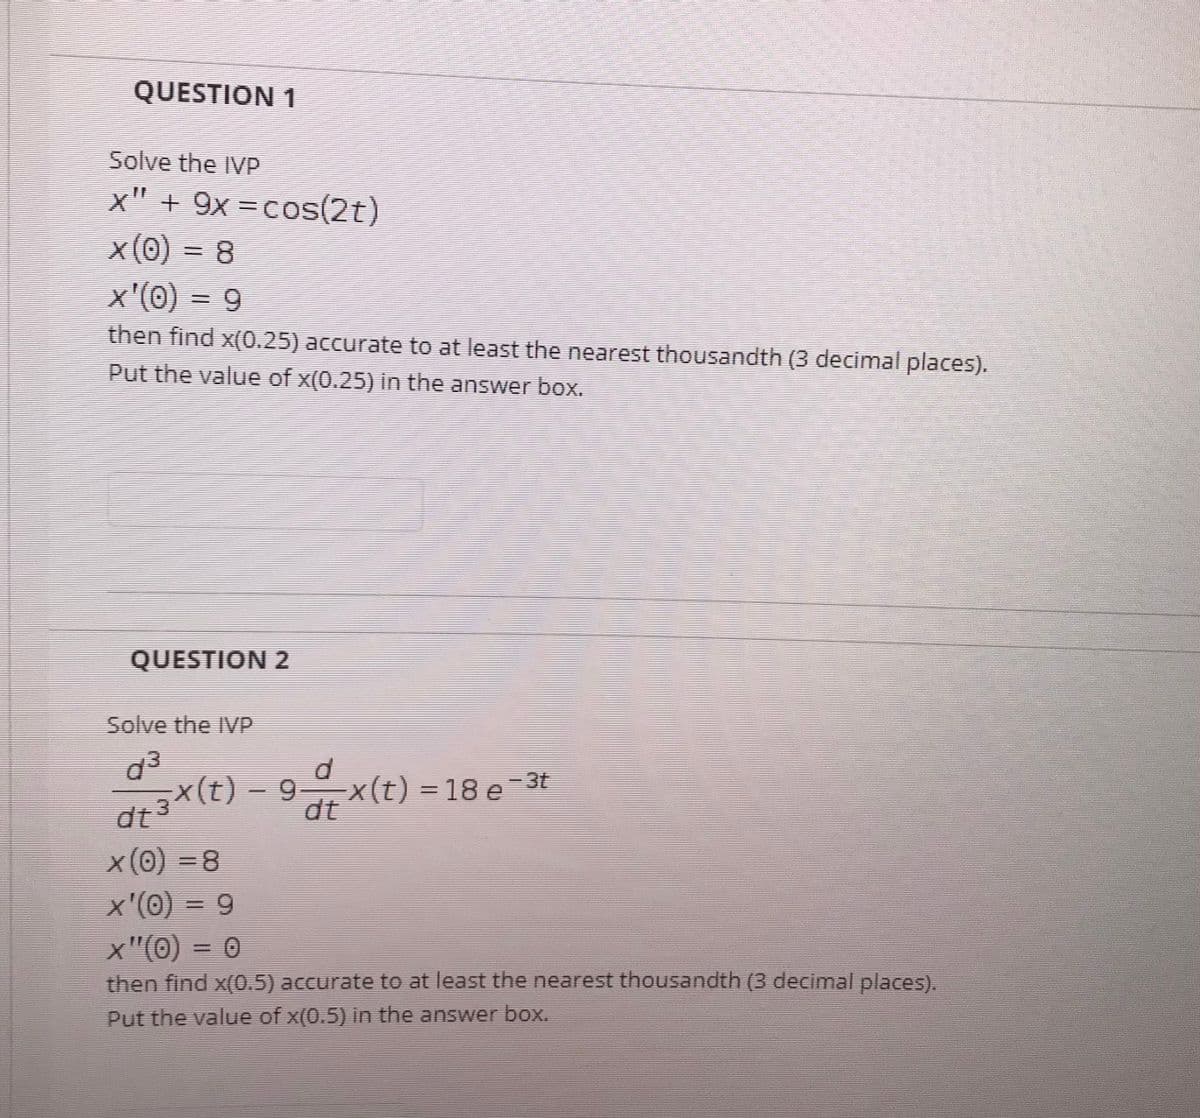 QUESTION 1
Solve the IVP
x" + 9x =cos(2t)
x(0) = 8
x'(0) = 9
then find x(0.25) accurate to at least the nearest thousandth (3 decimal places).
Put the value of x(0.25) in the answer box.
QUESTION 2
Solve the IVP
d3
dt3X(t) - 9x(t) = 18 e-3t
X(t) = 18 e =3t
x(0) =8
x'(0) = 9
x"(0) = 0
then find x(0.5) accurate to at least the nearest thousandth (3 decimal places).
Put the value of x(0.5) in the answer box.
